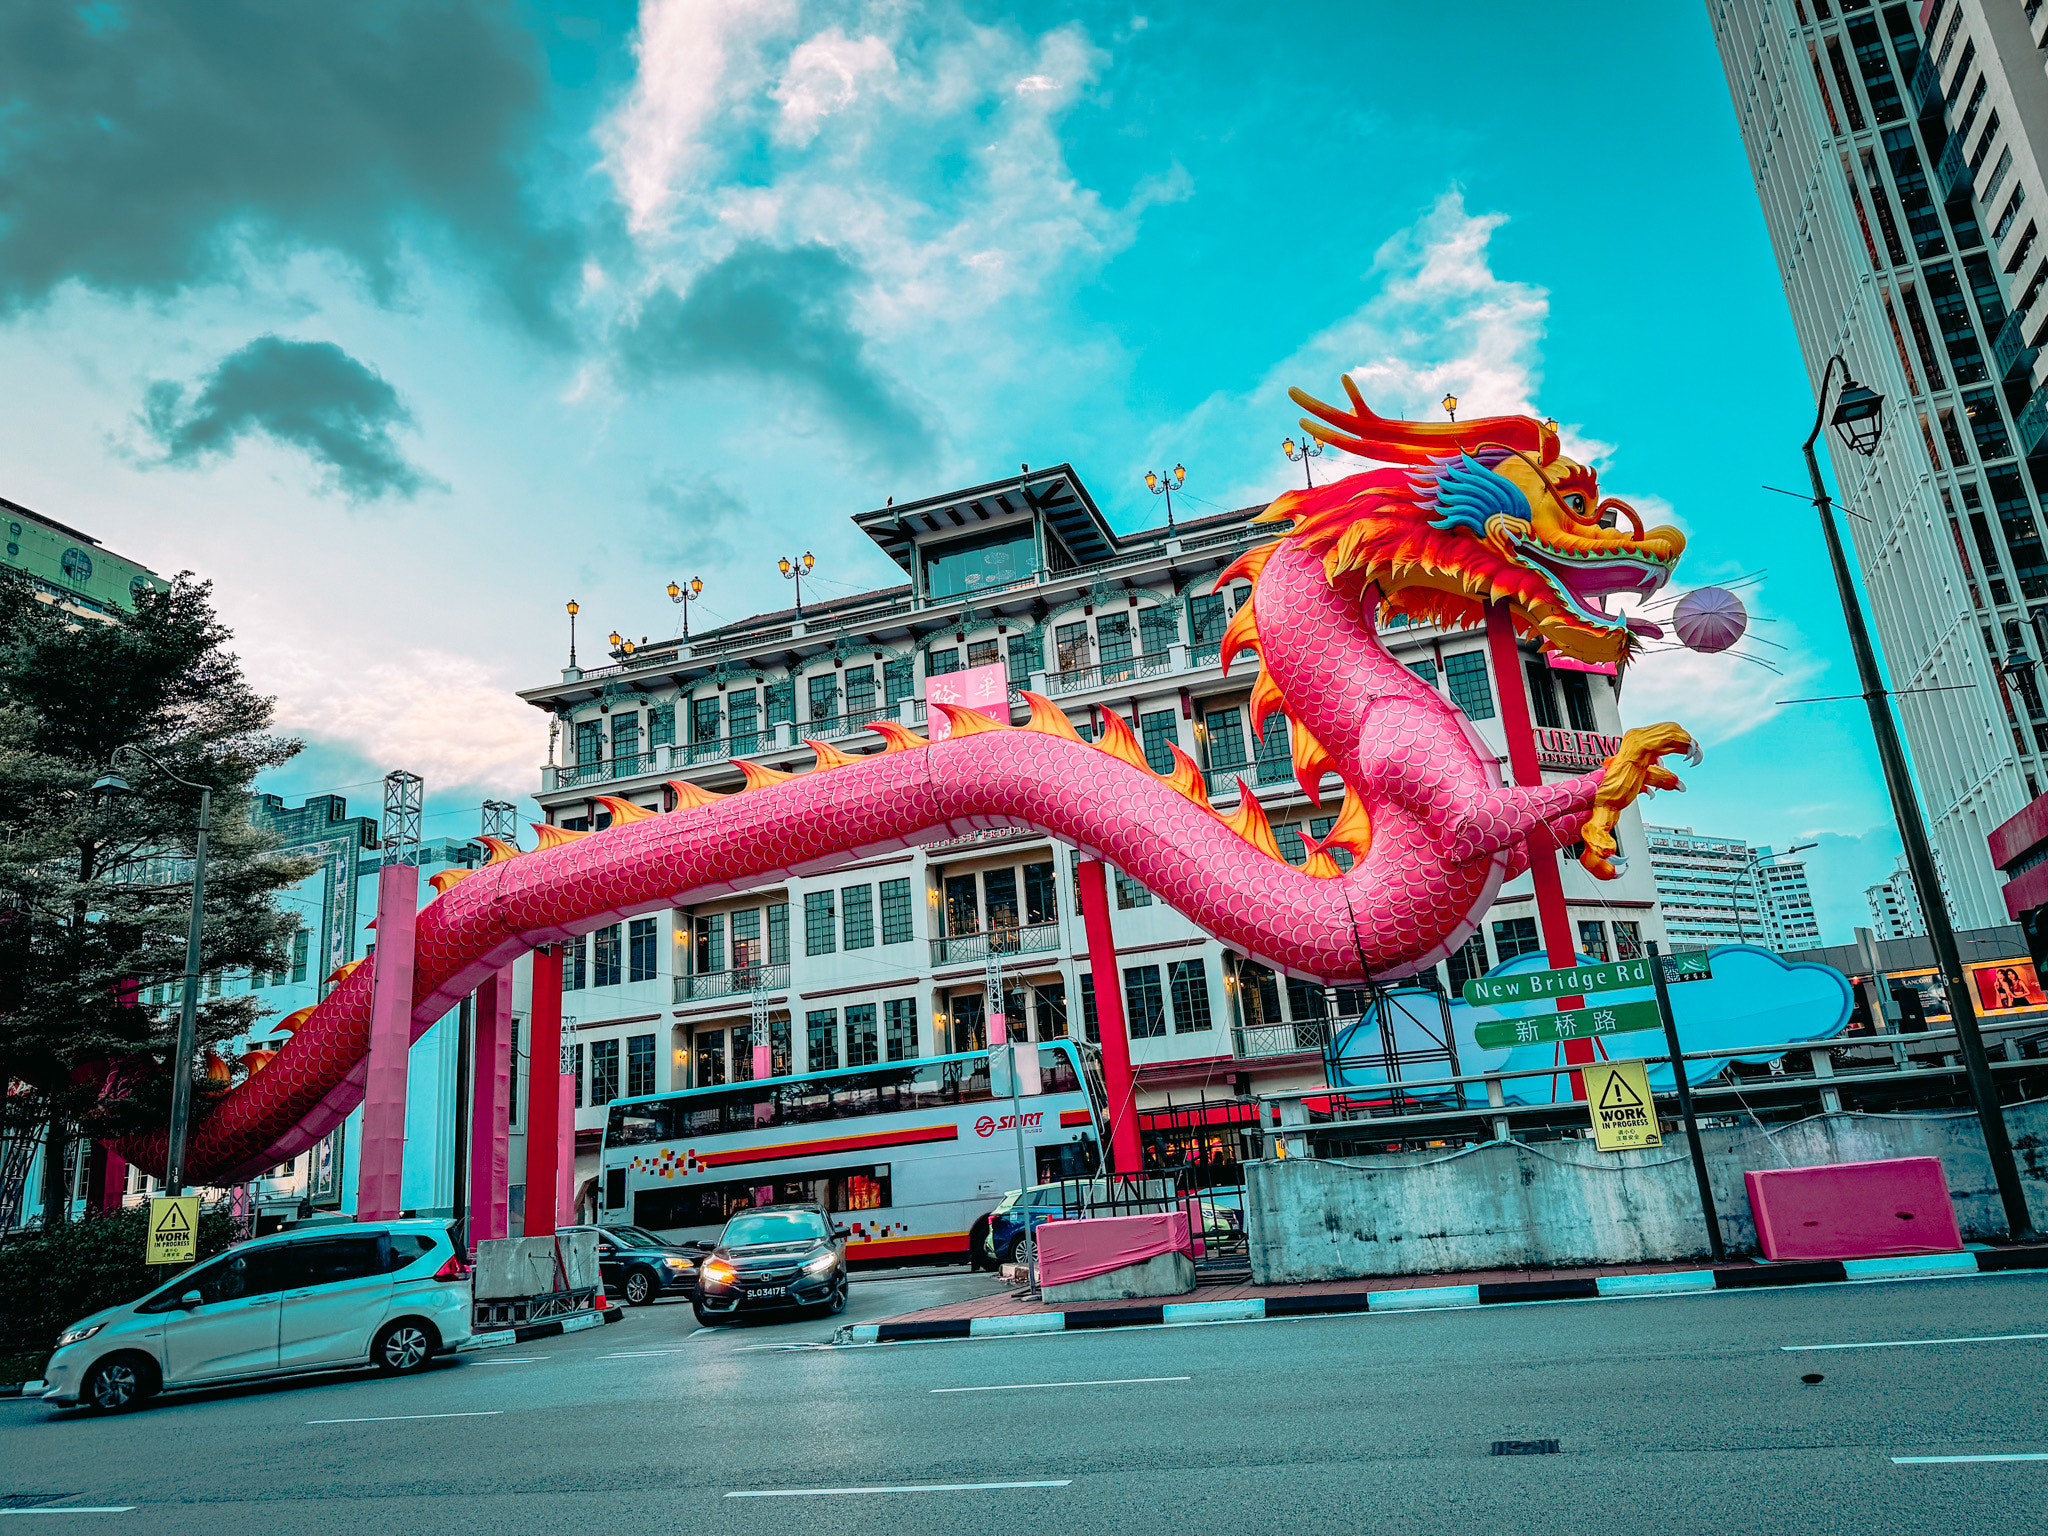 Dragon in Chinatown by TheViewdeck on 500px.com